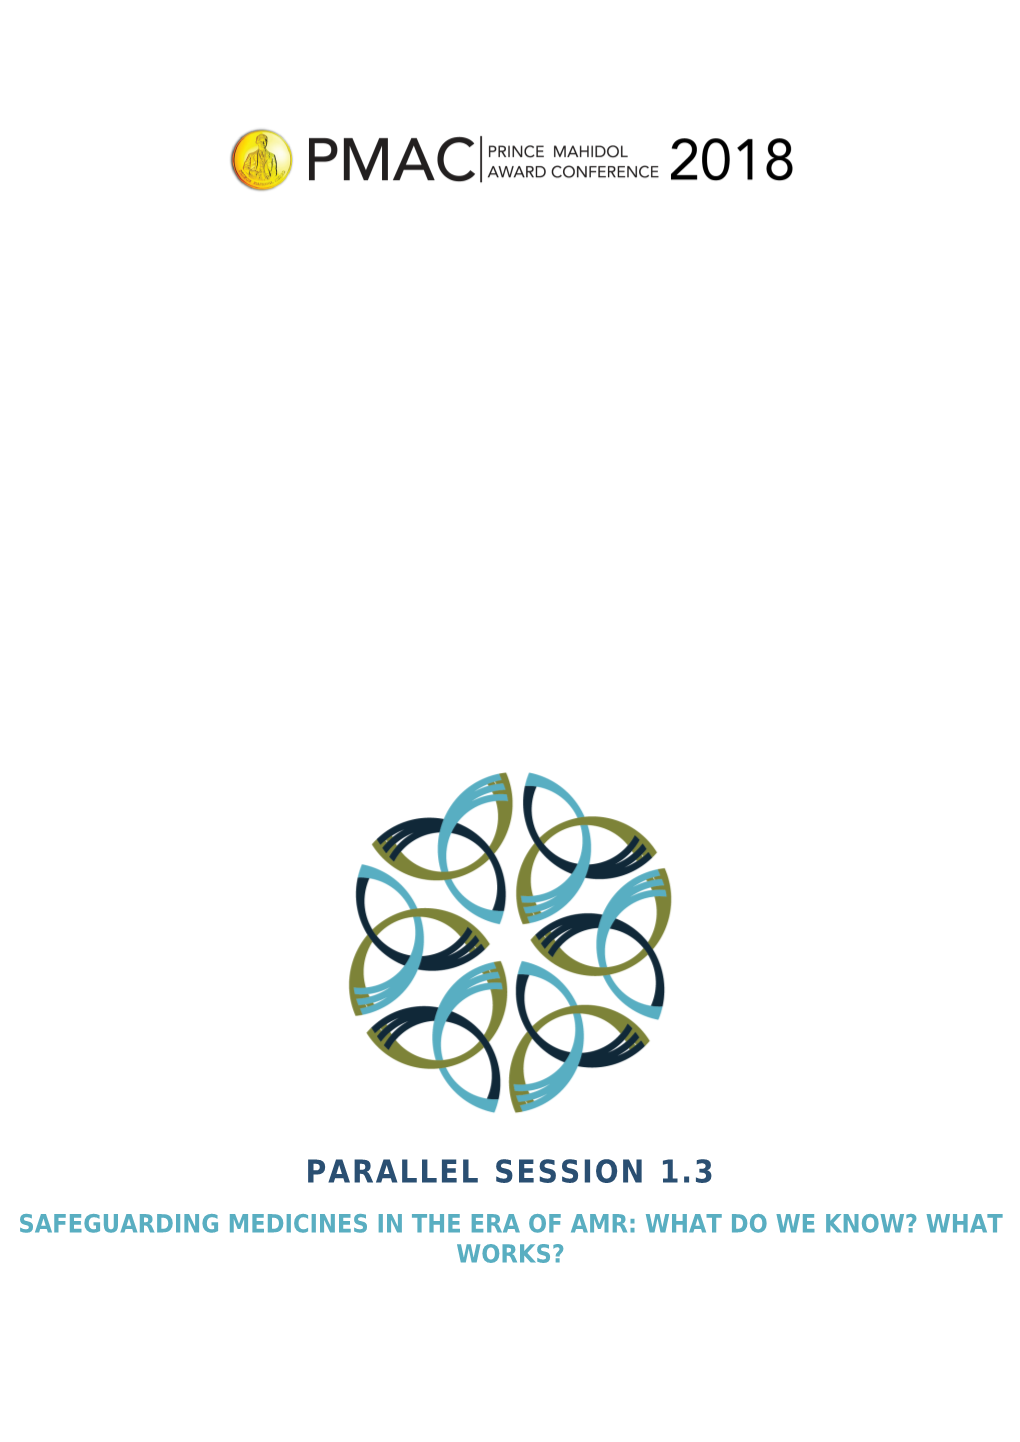 Parallel Session 1.3 Safeguarding Medicines in the Era of Amr: What Do We Know? What Works? | Background